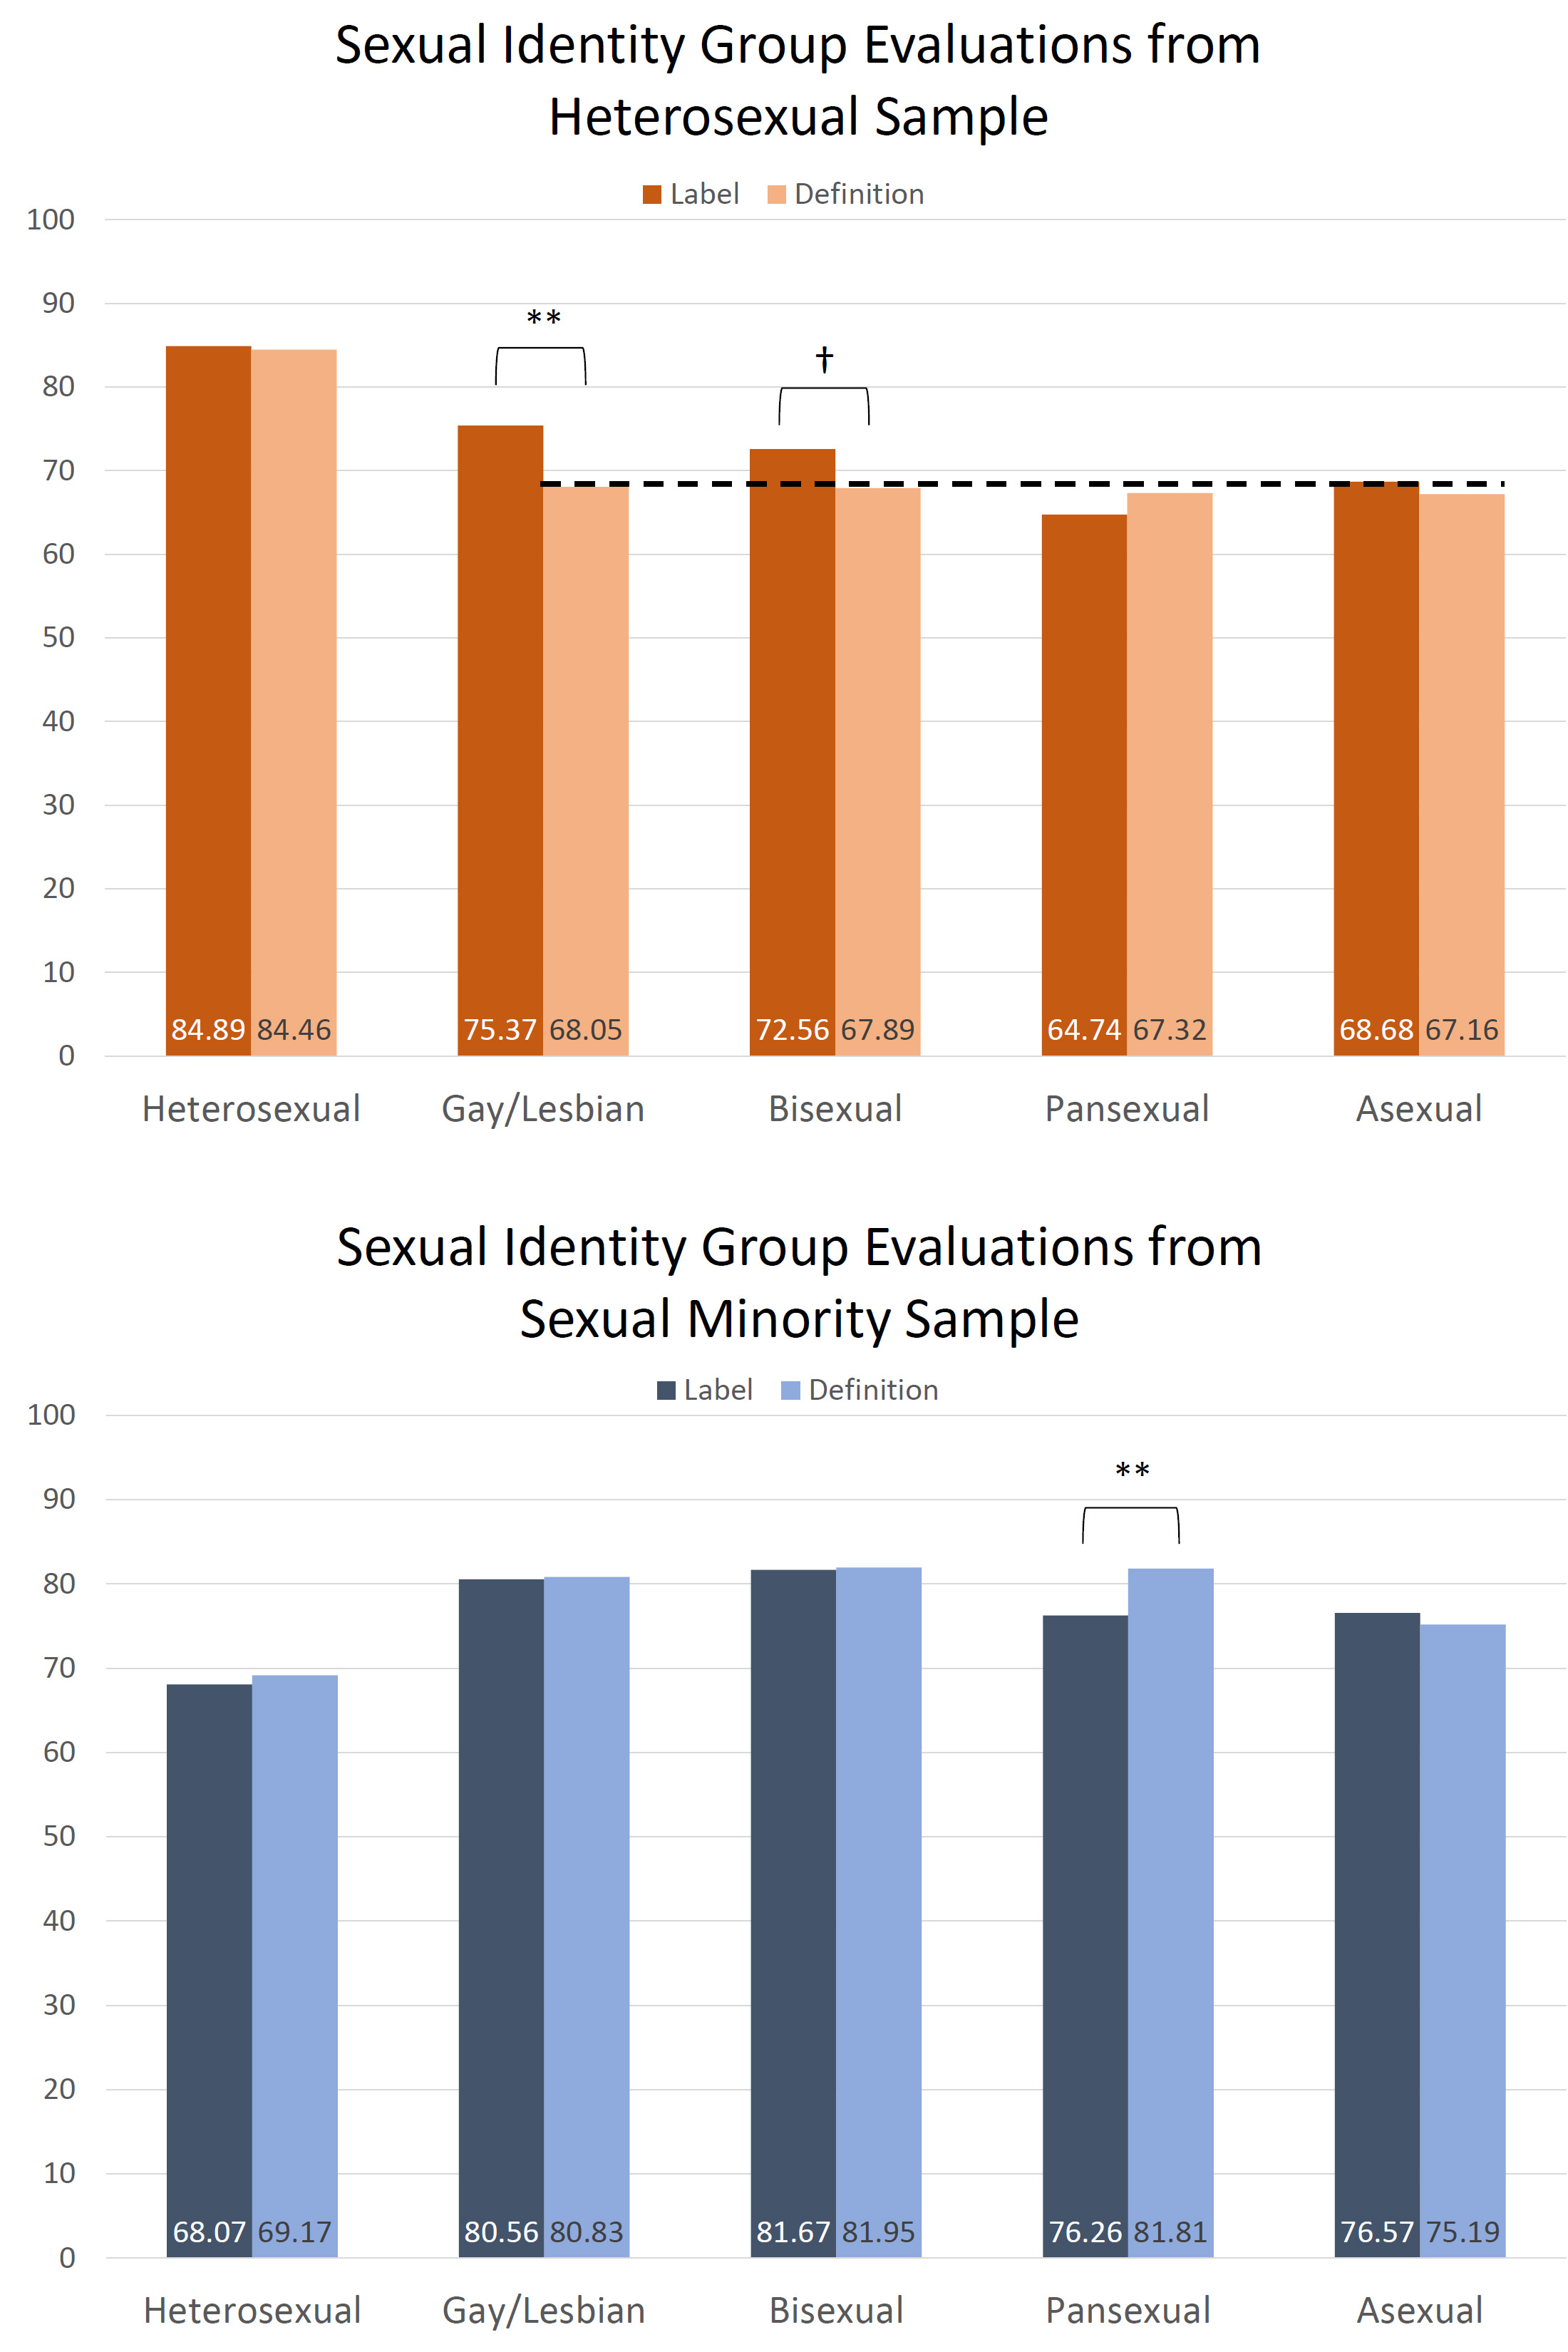 Plot showing evaluation of heterosexual, gay/lesbian, bisexual, pansexual, and asexual people